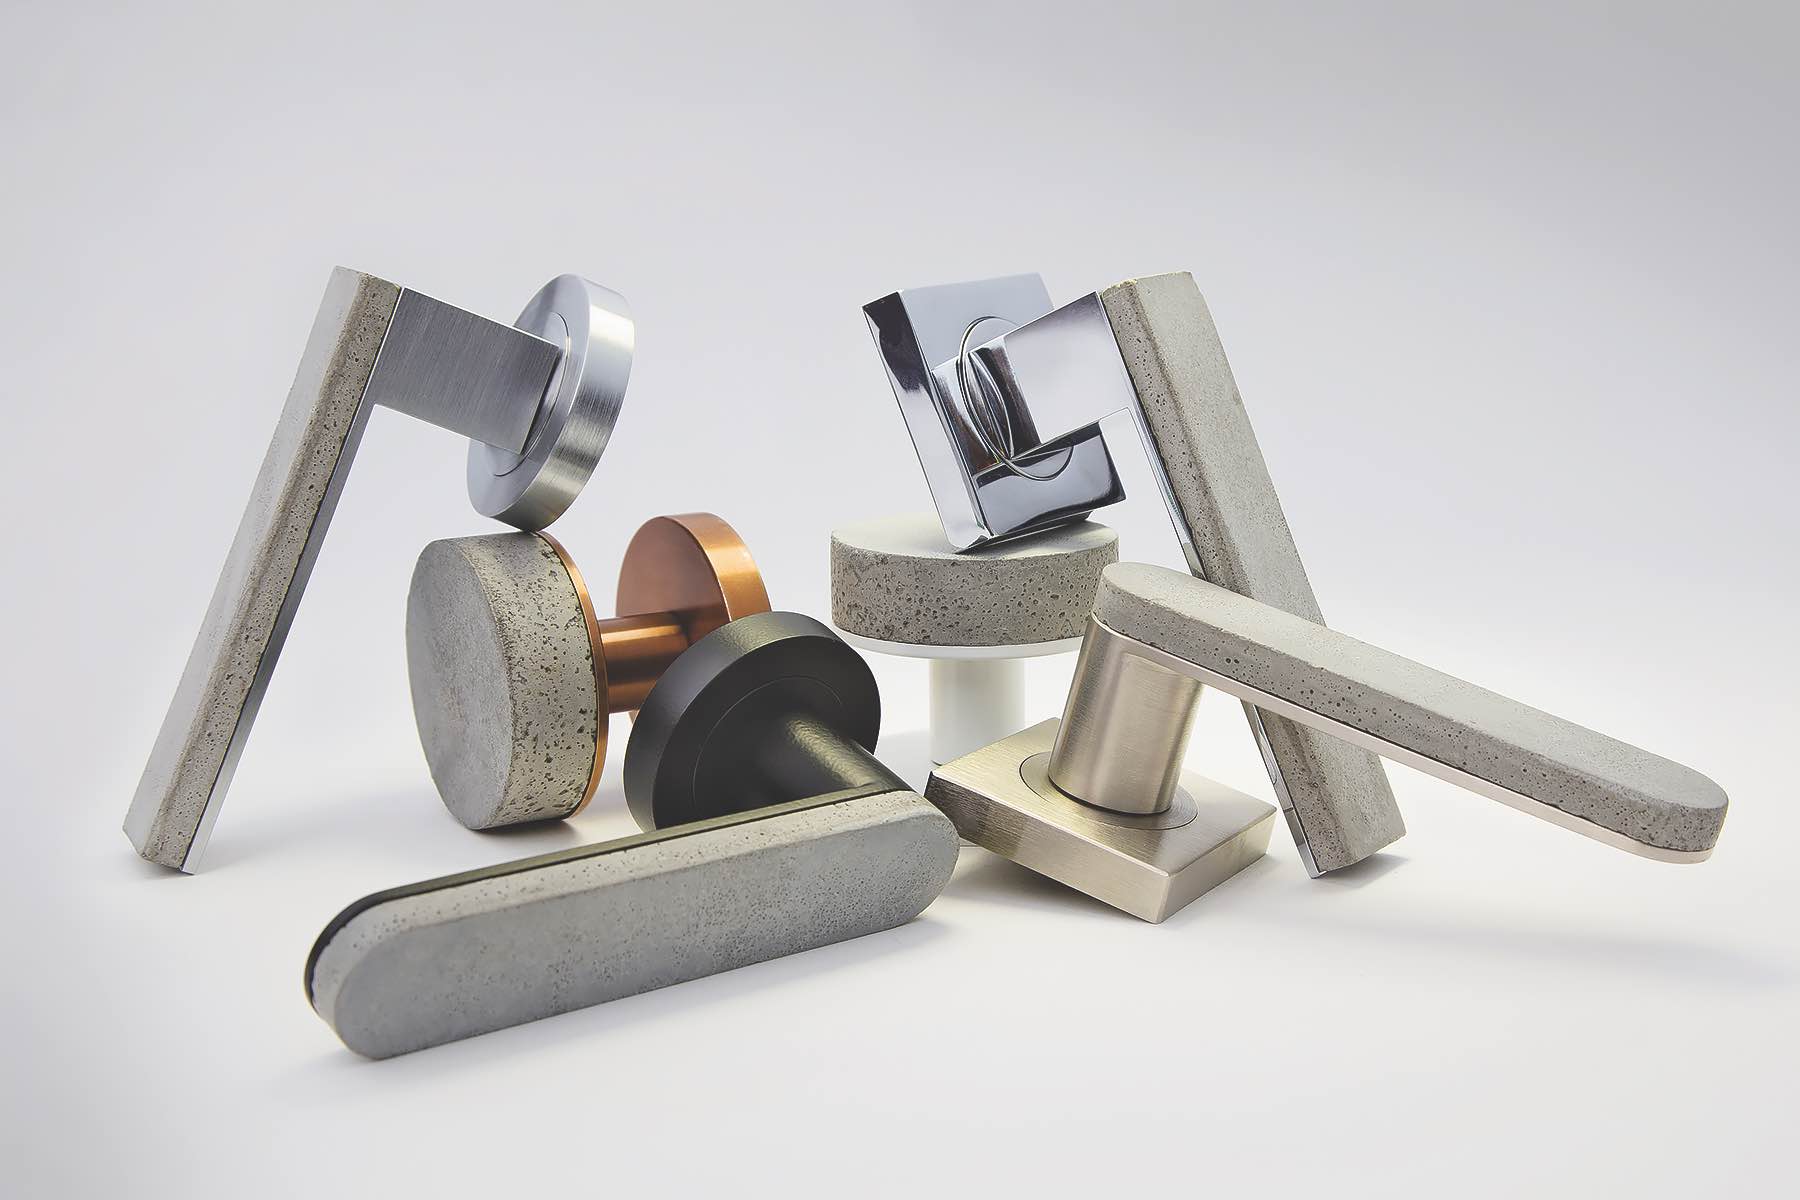 The Bullet & Stone Collection from Australian company Designer Doorware marries concrete and metal in door handles and round knob profiles, melding hot and cold aesthetics and offering a unique tactile experience. The solid brass fittings that back each concrete form are finished in either Florentine Bronze (in a Medium or Dark tone), Polished Nickel, or Satin Black Chrome. Custom finishes for the concrete are available by request.